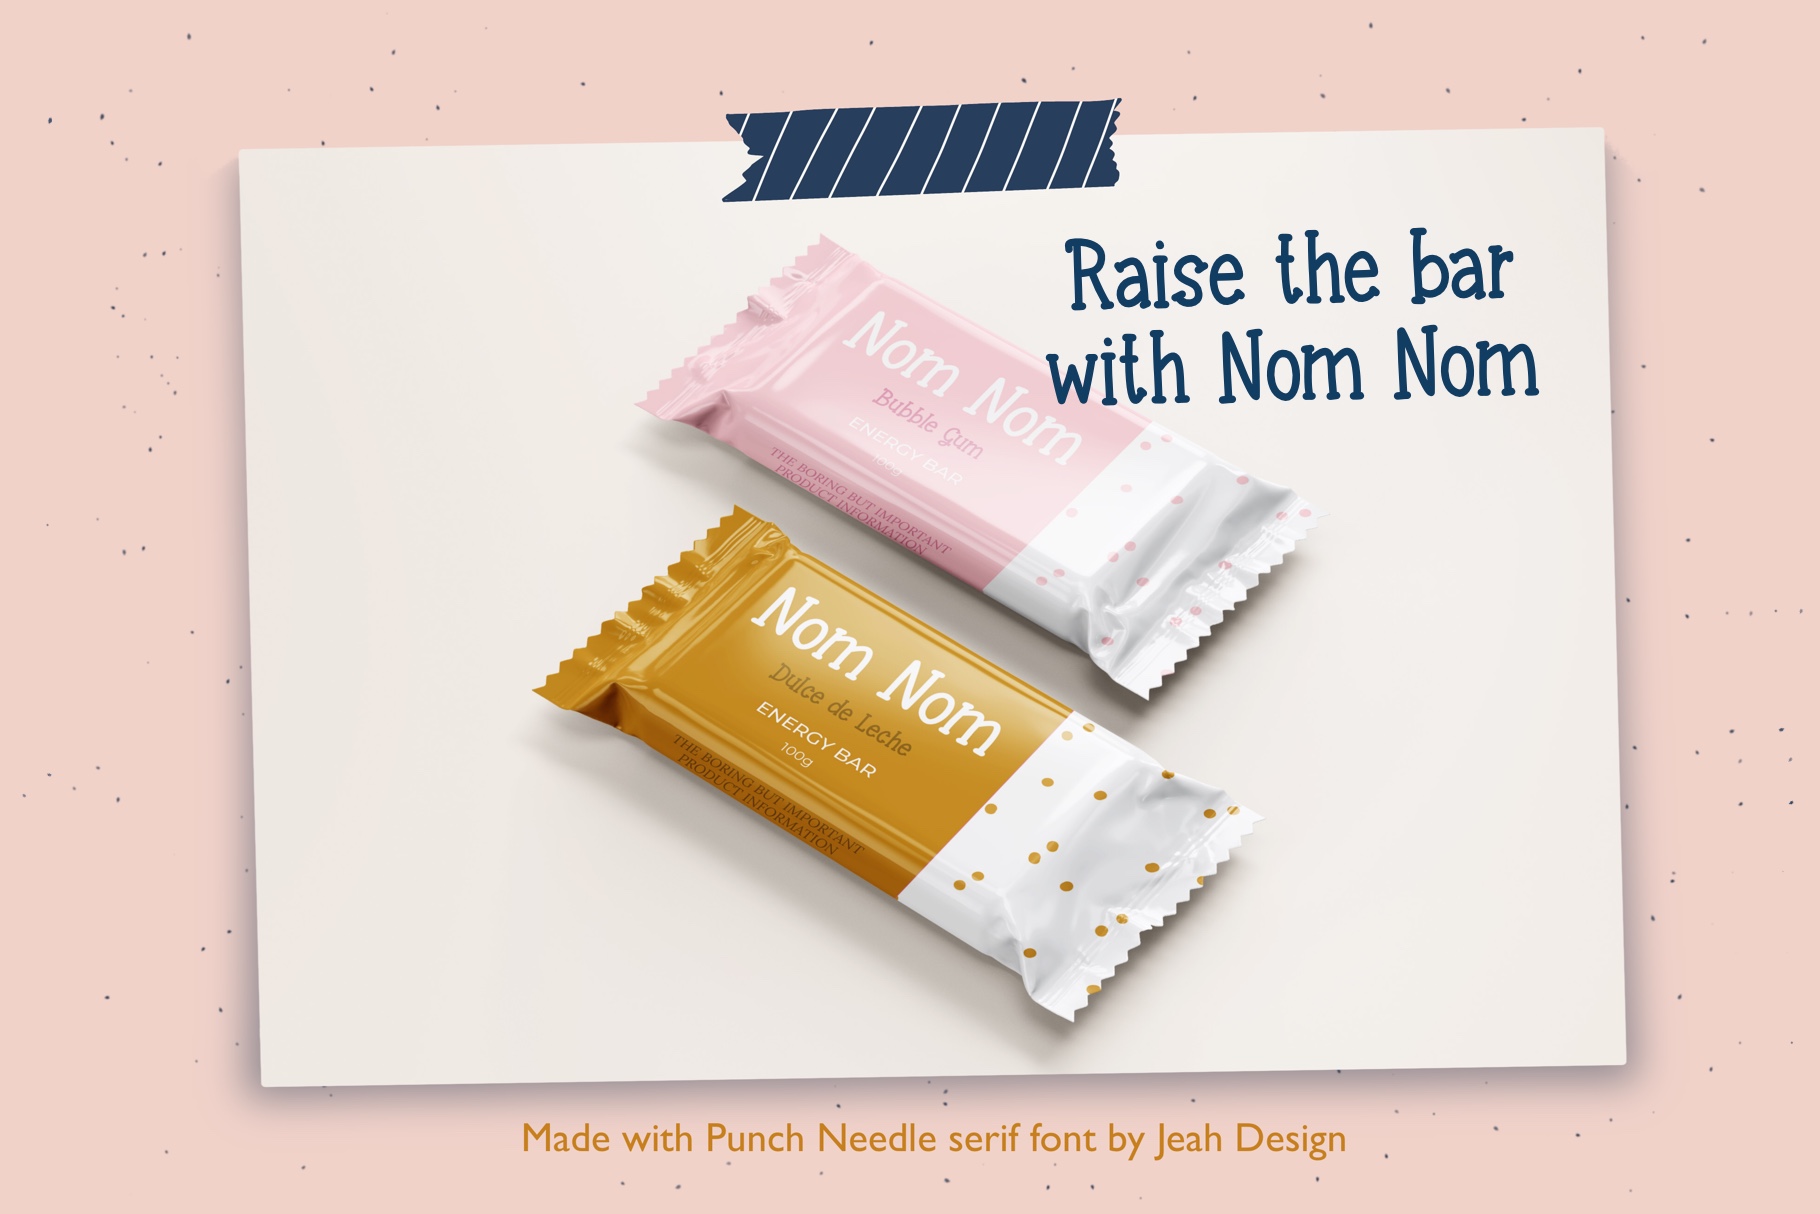 Mockup of two energy bars that display the Punch Needle serif font.